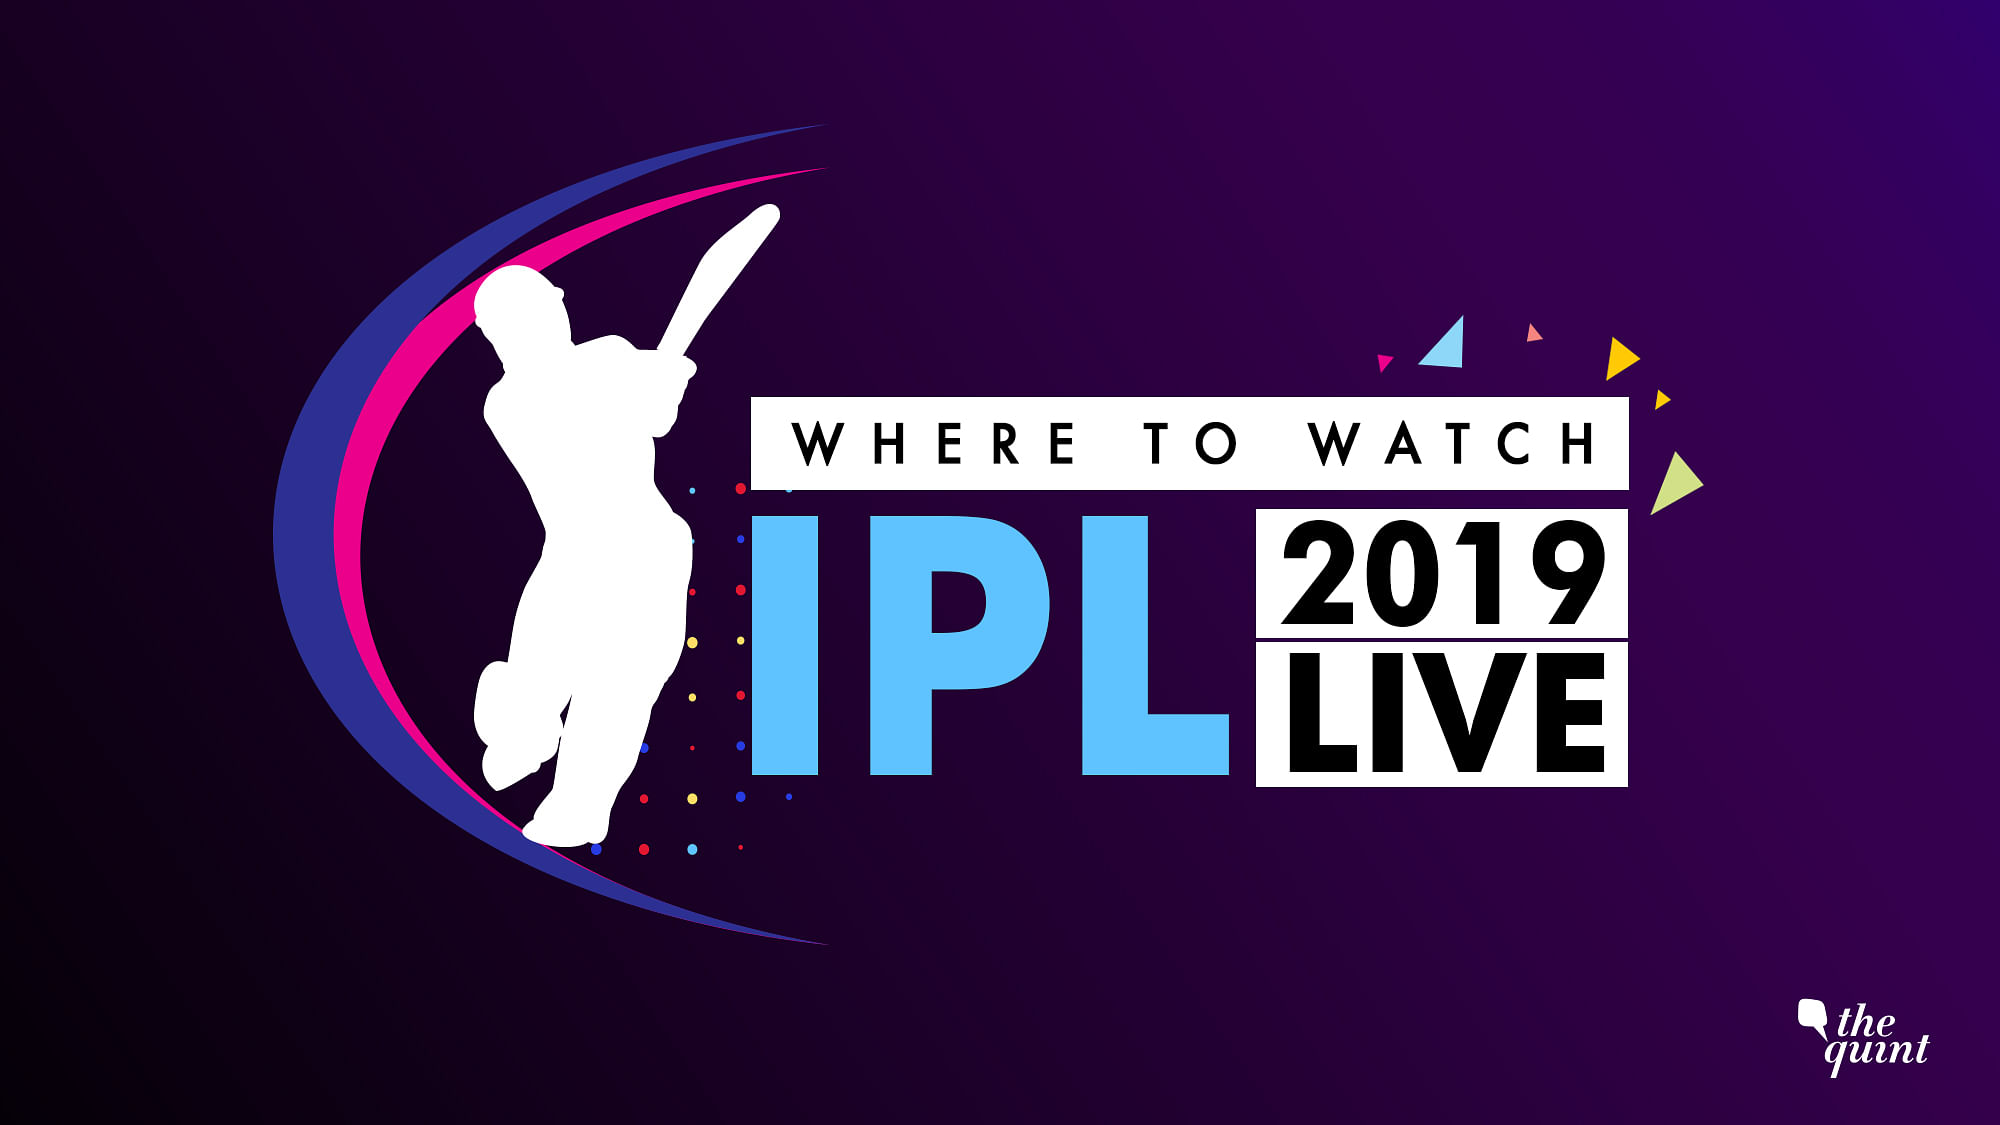 IPL 2019: Where to Watch Match Online and on TV, RCB vs KKR